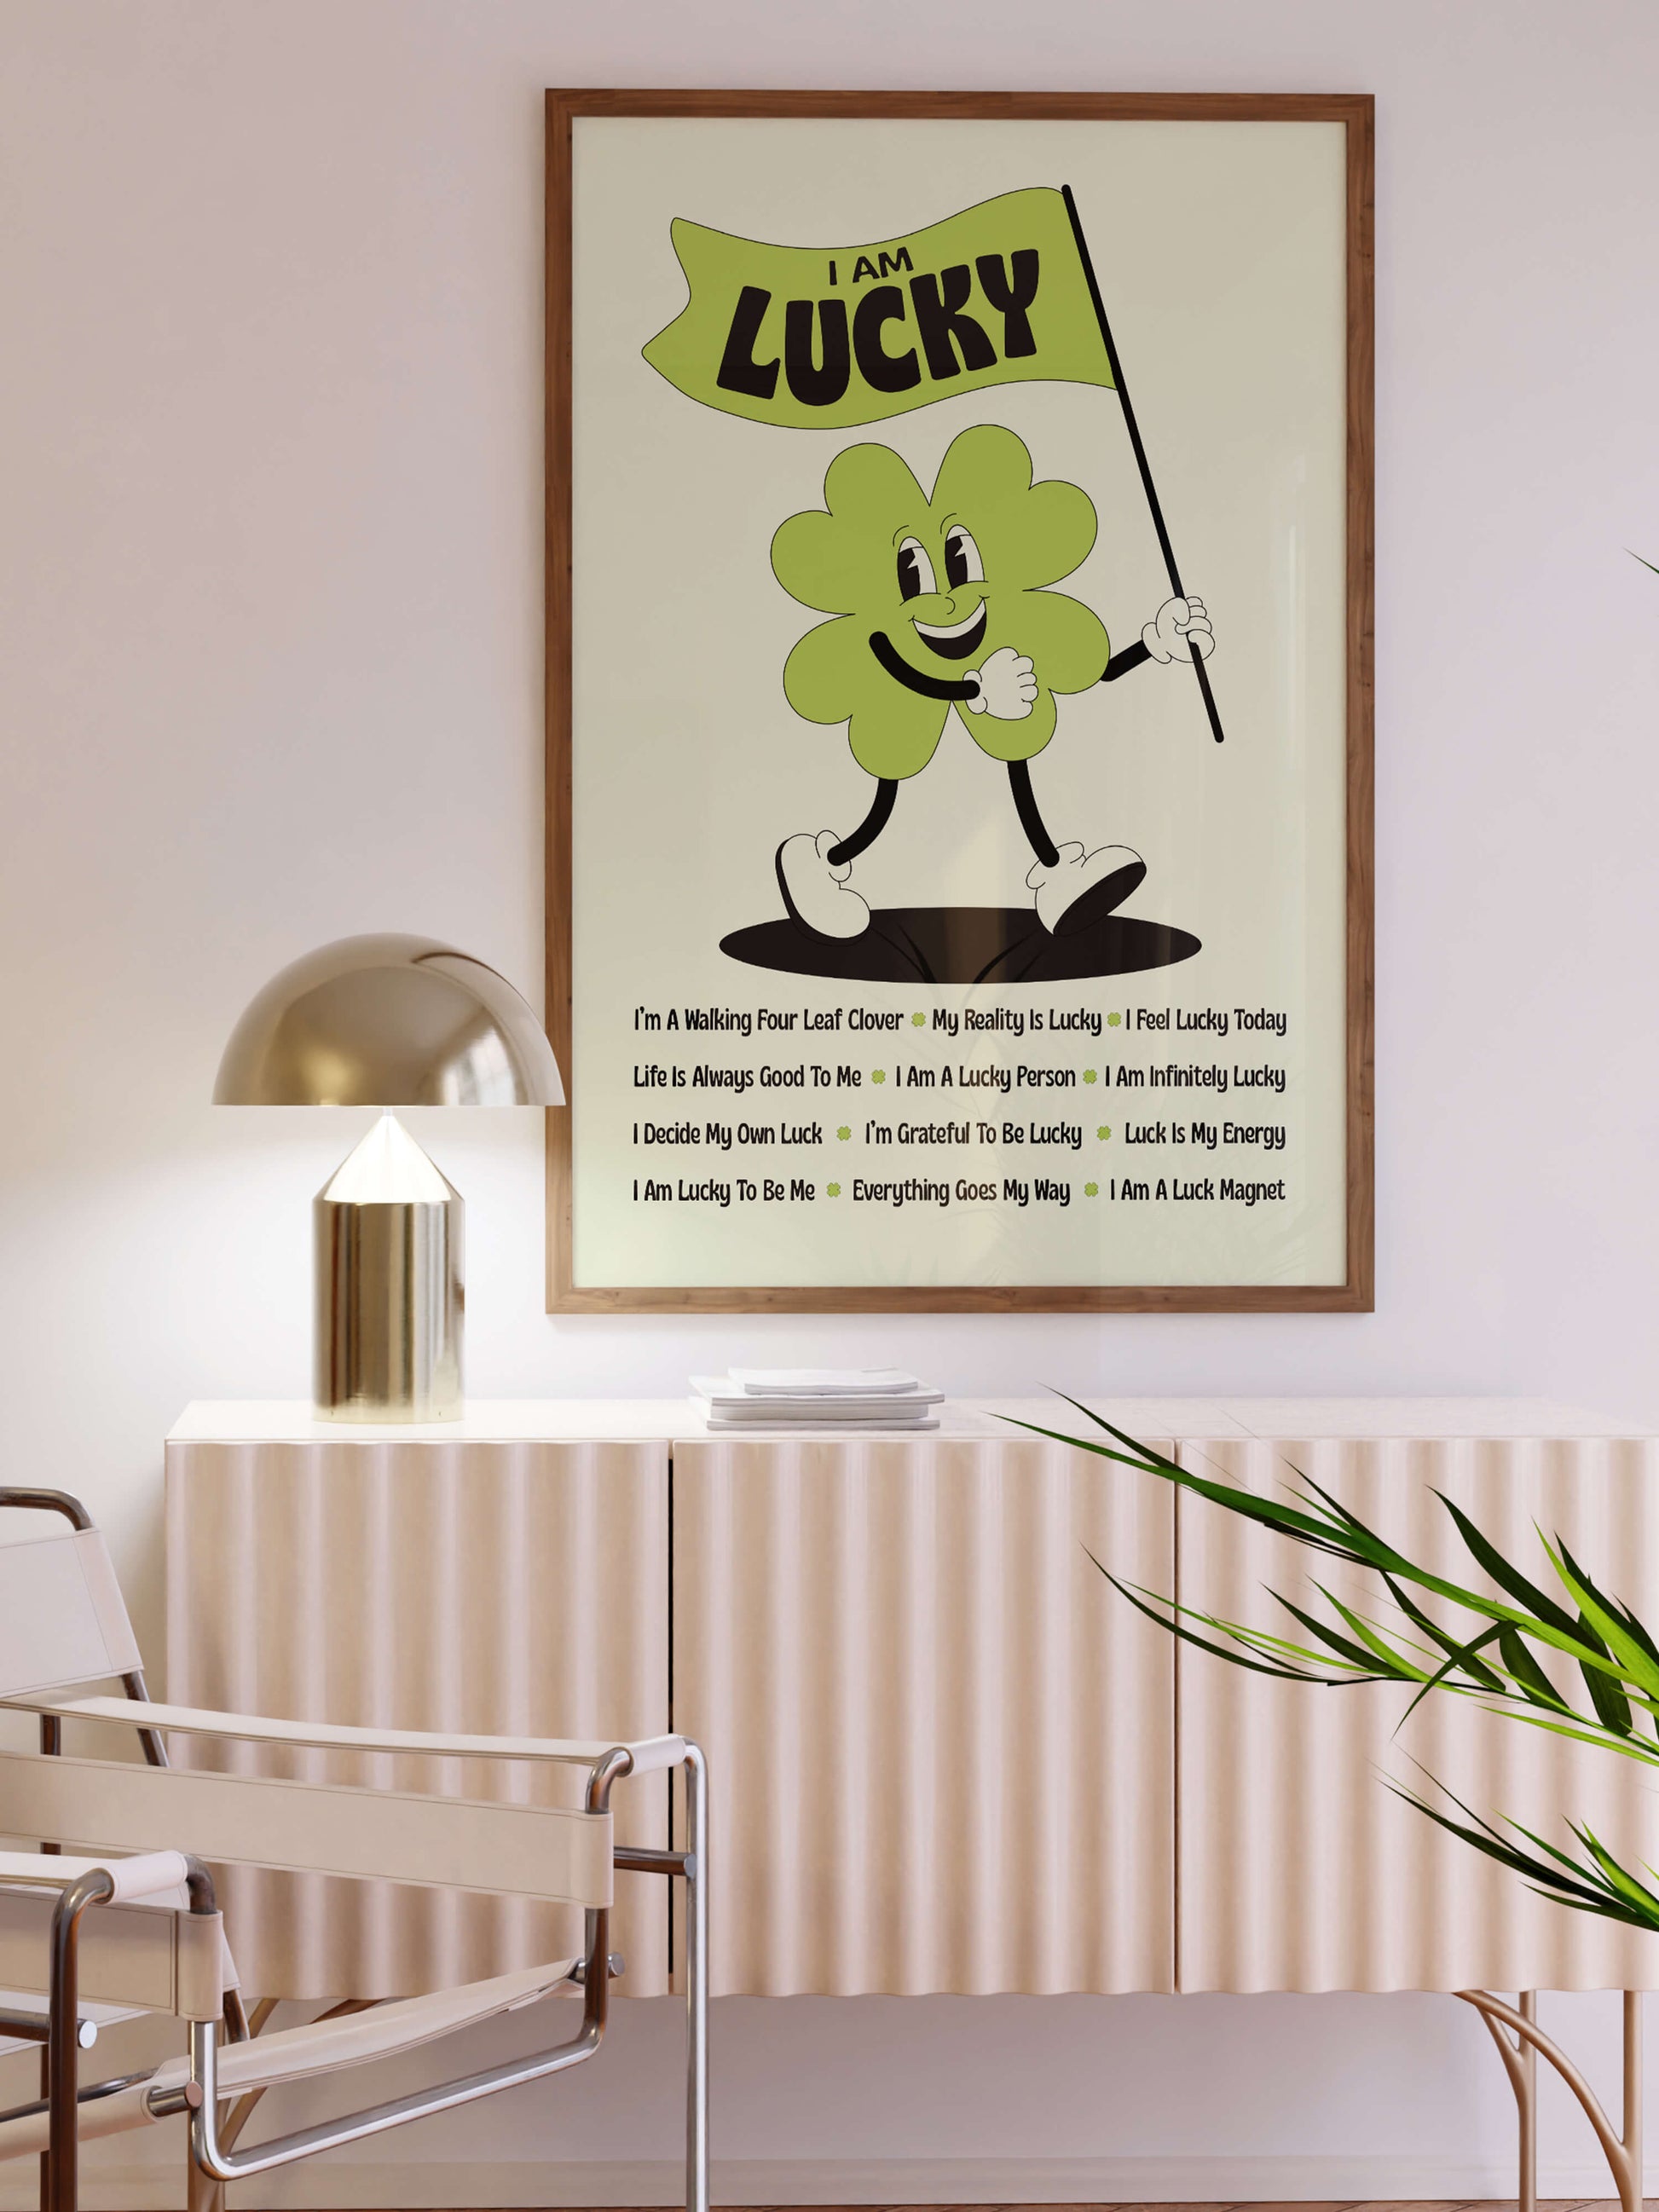 I am lucky affirmations print framed, retro mascot character, lucky girl, positive affirmation print